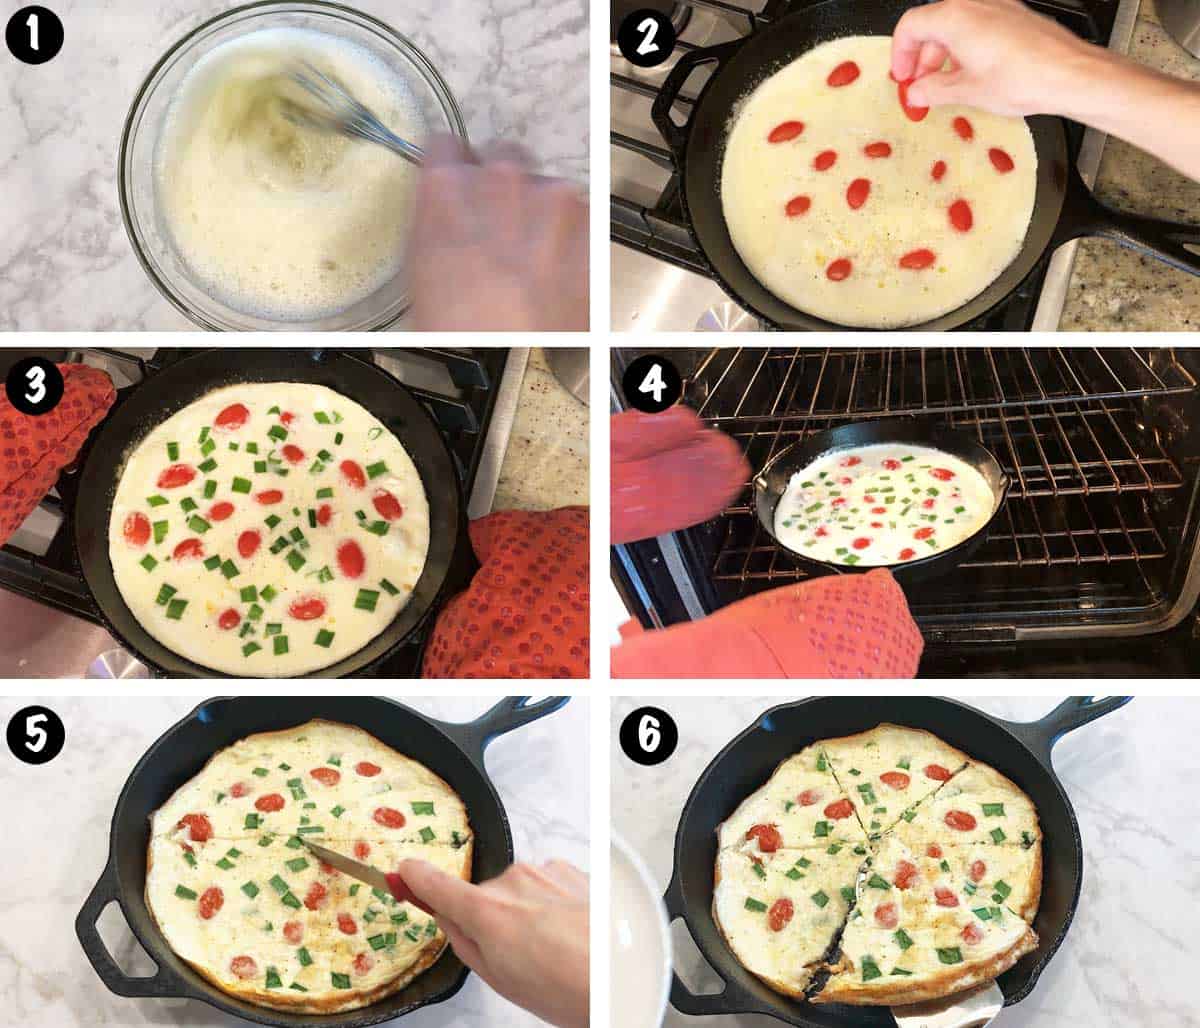 A six-photo collage showing the steps for making an egg white frittata. 